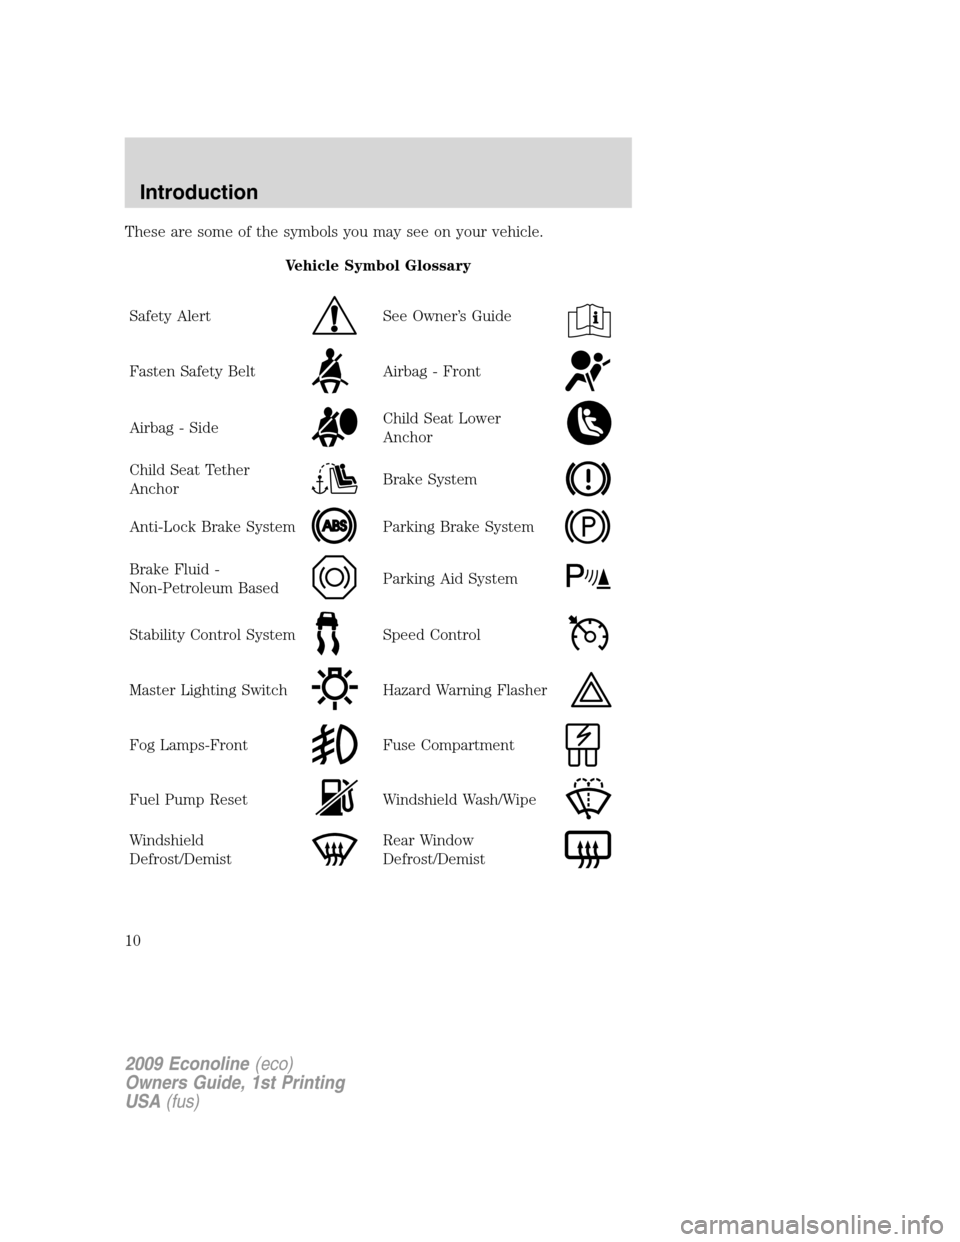 FORD E SERIES 2009 4.G Owners Manual These are some of the symbols you may see on your vehicle.
Vehicle Symbol Glossary
Safety Alert
See Owner’s Guide
Fasten Safety BeltAirbag - Front
Airbag - SideChild Seat Lower
Anchor
Child Seat Tet